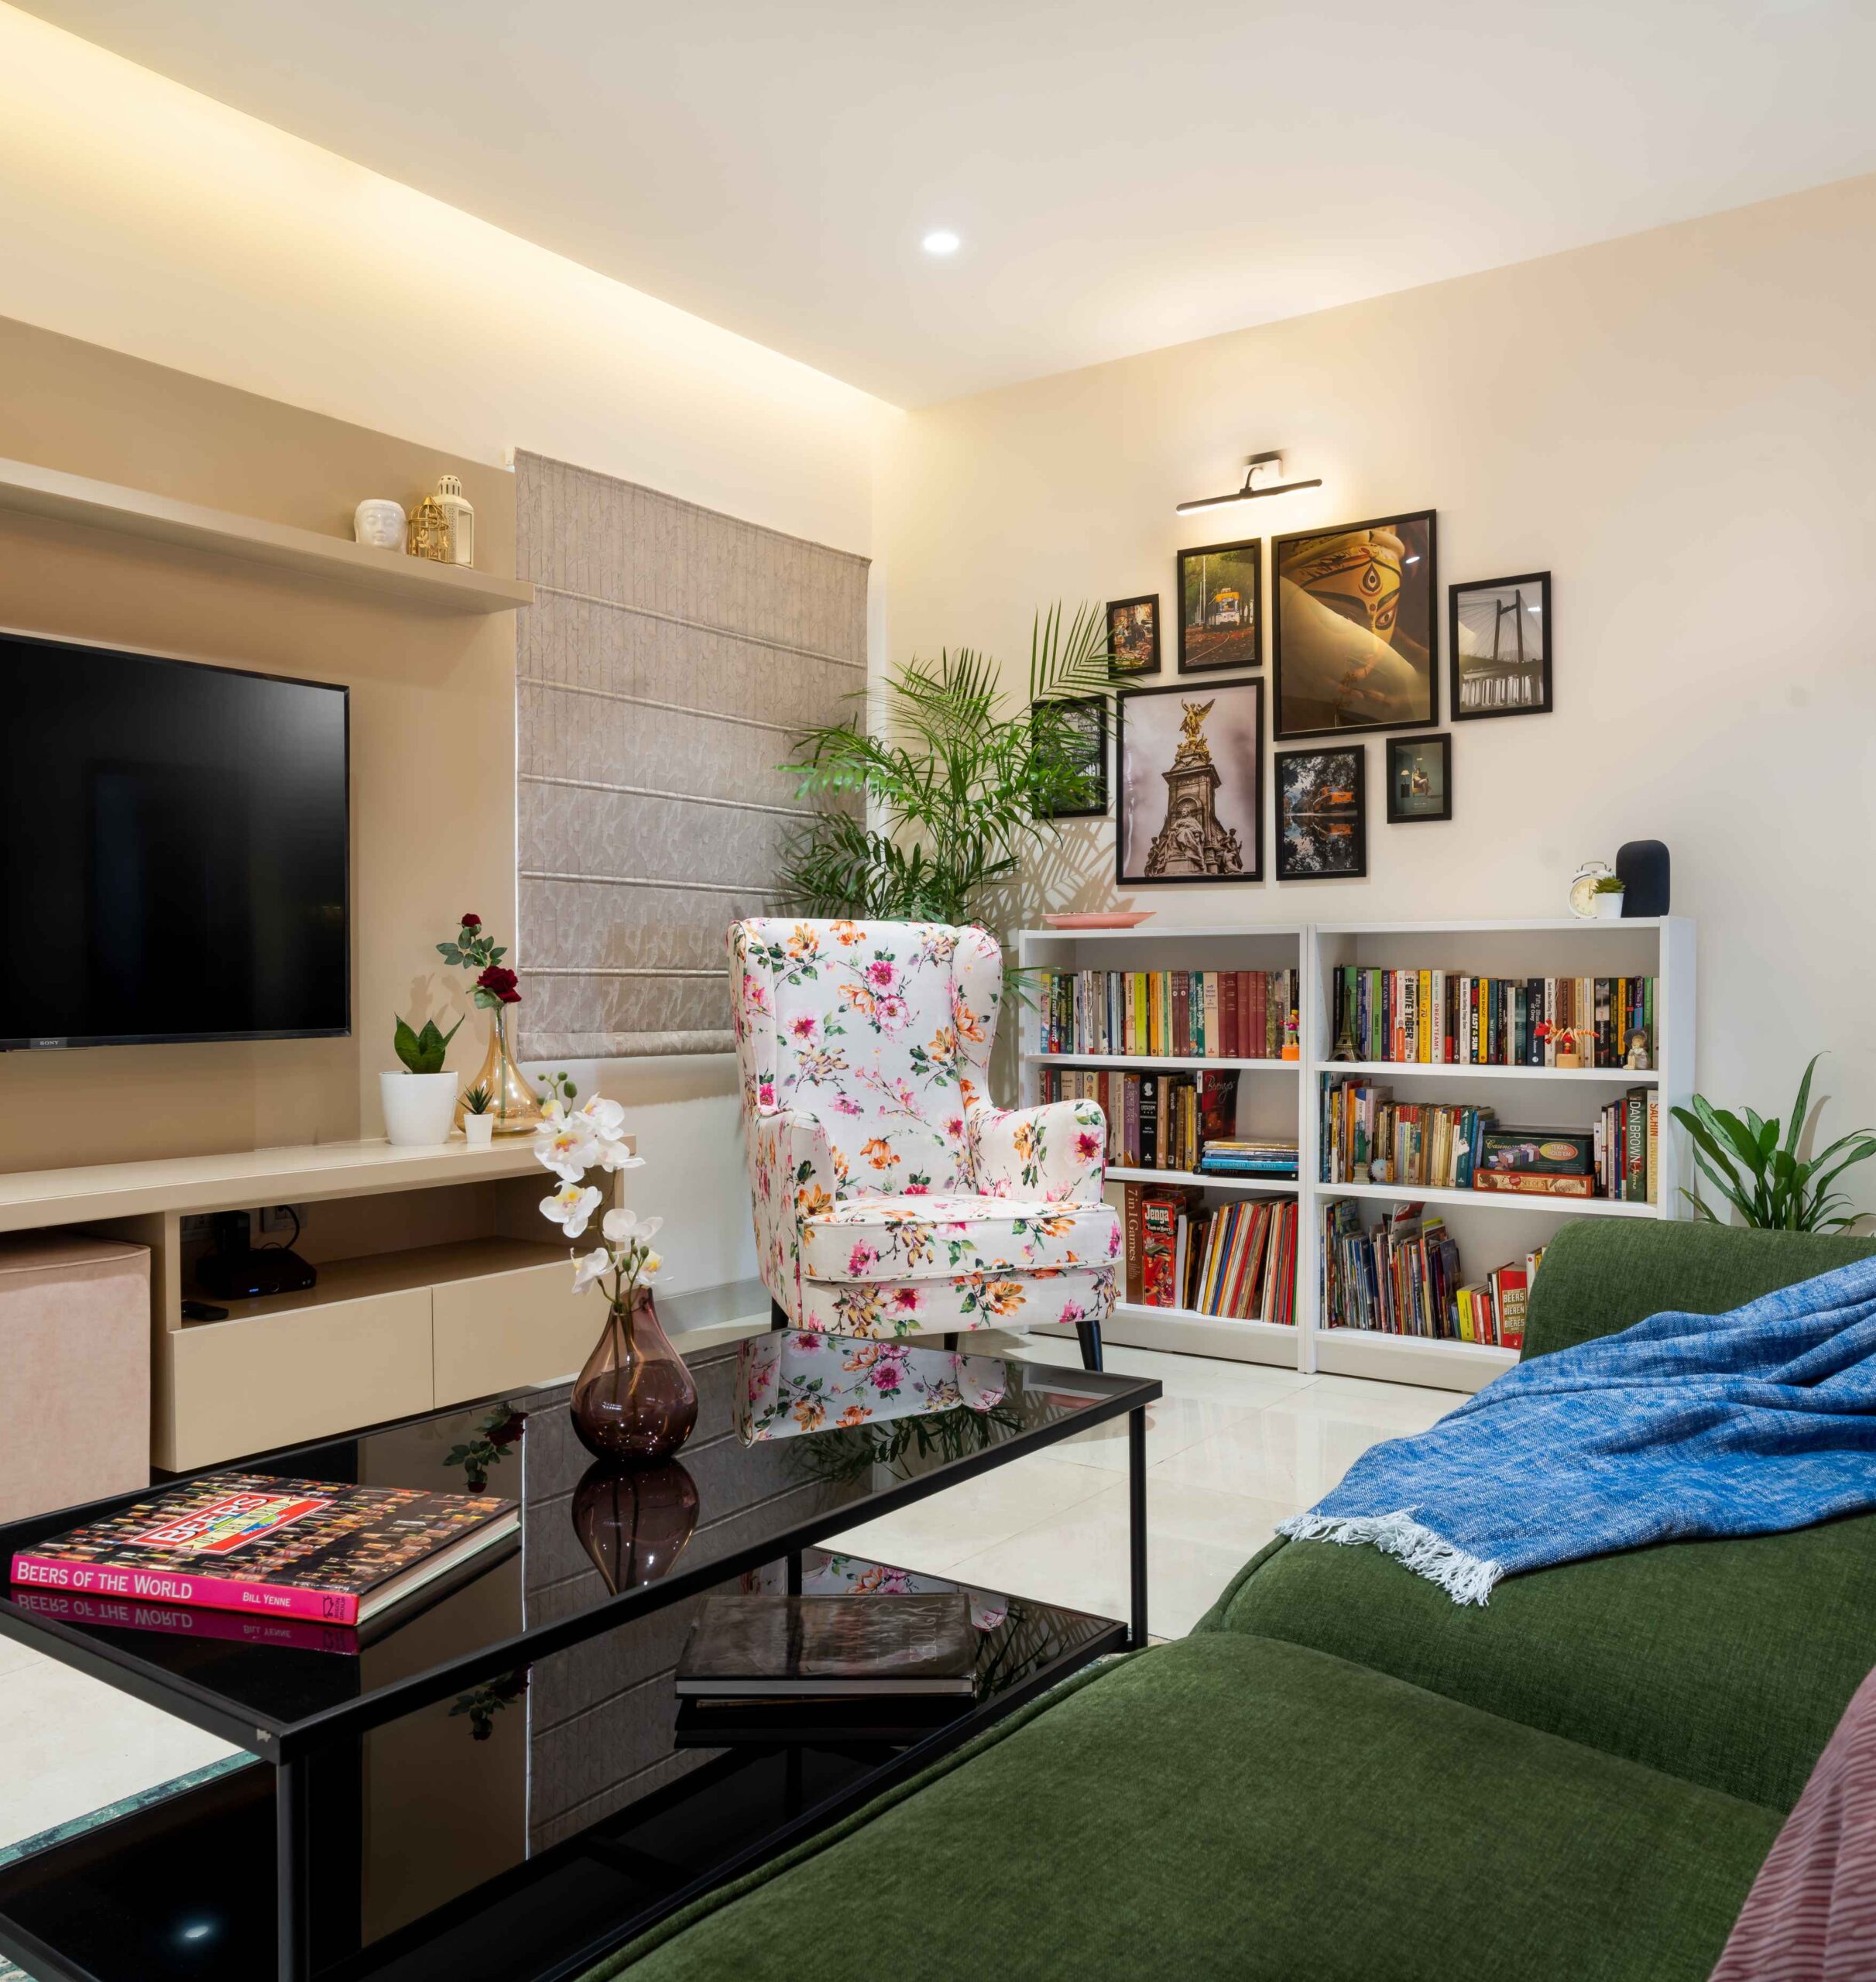 Home of Hues, a family home in Hyderabad, designed by Studio Emerald 1